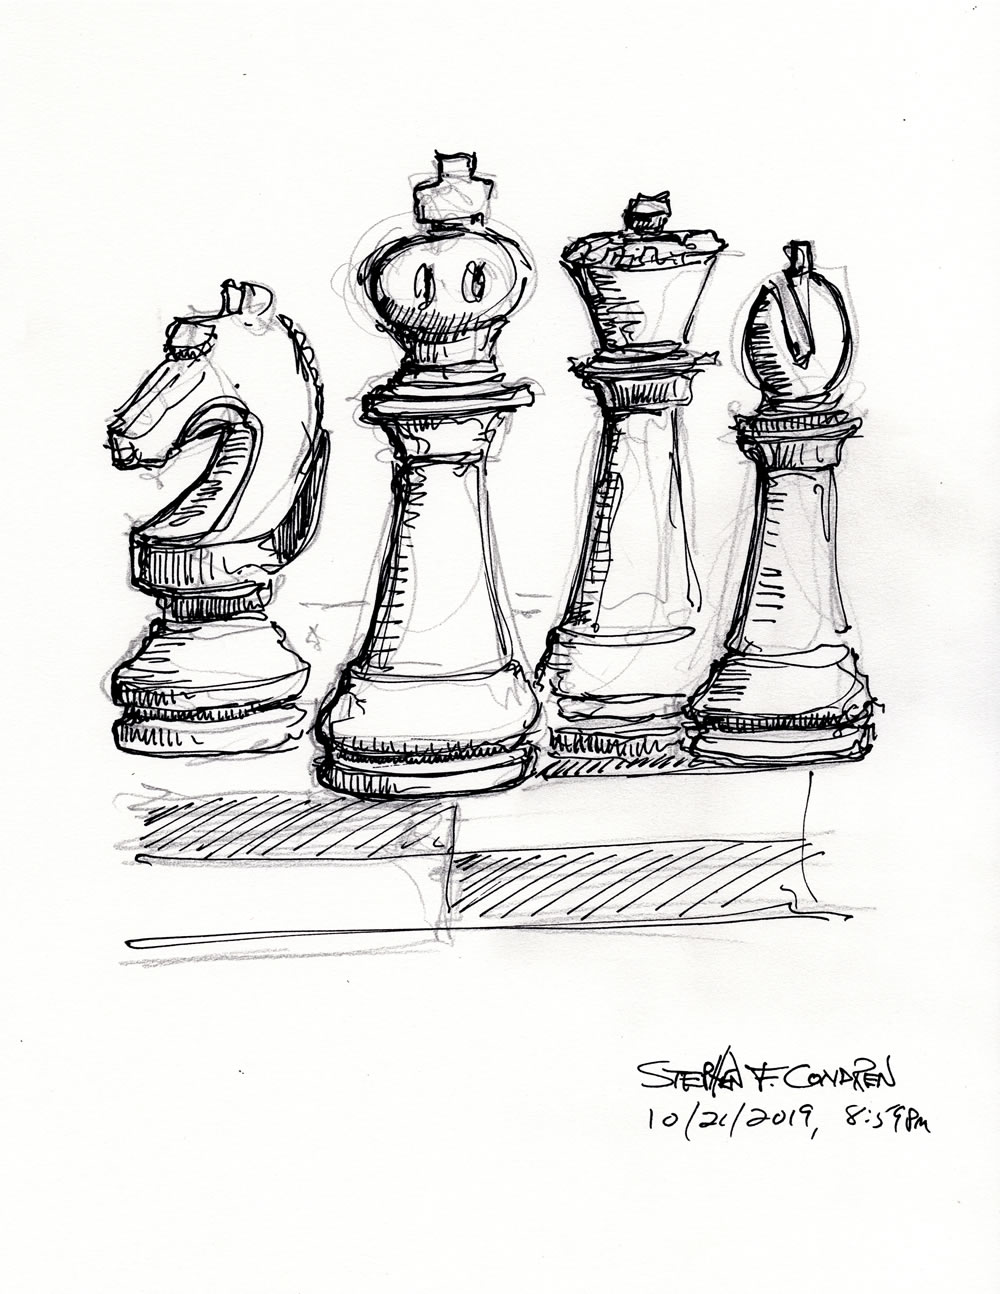 Pen & ink drawings of chess pieces.